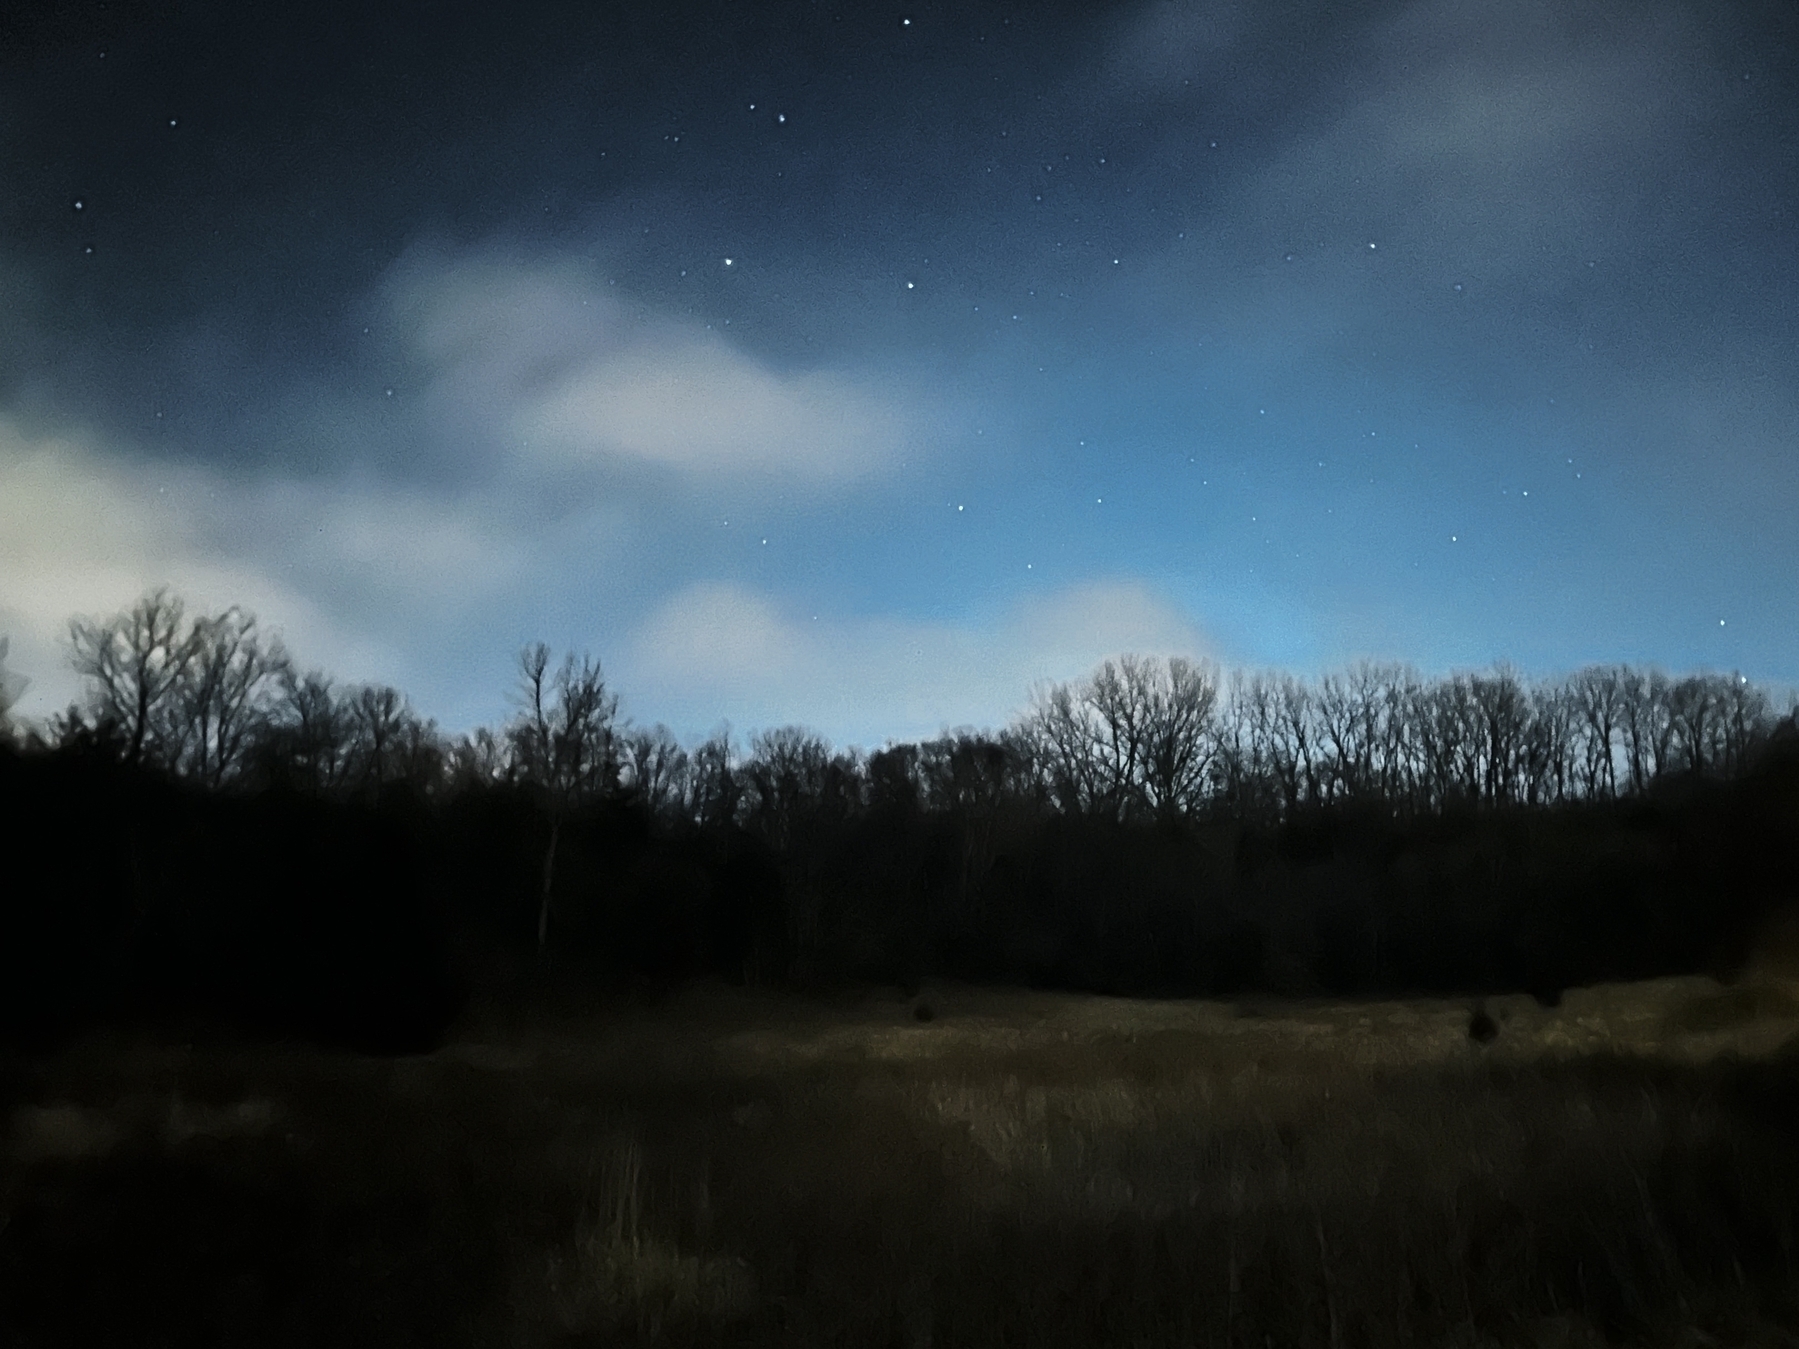 A nighttime landscape showing a field with dry grass, a line of leafless trees against a dark sky scattered with stars, and clouds with a hint of light blue, likely from the moon or residual twilight. The image has a painterly, soft-focus